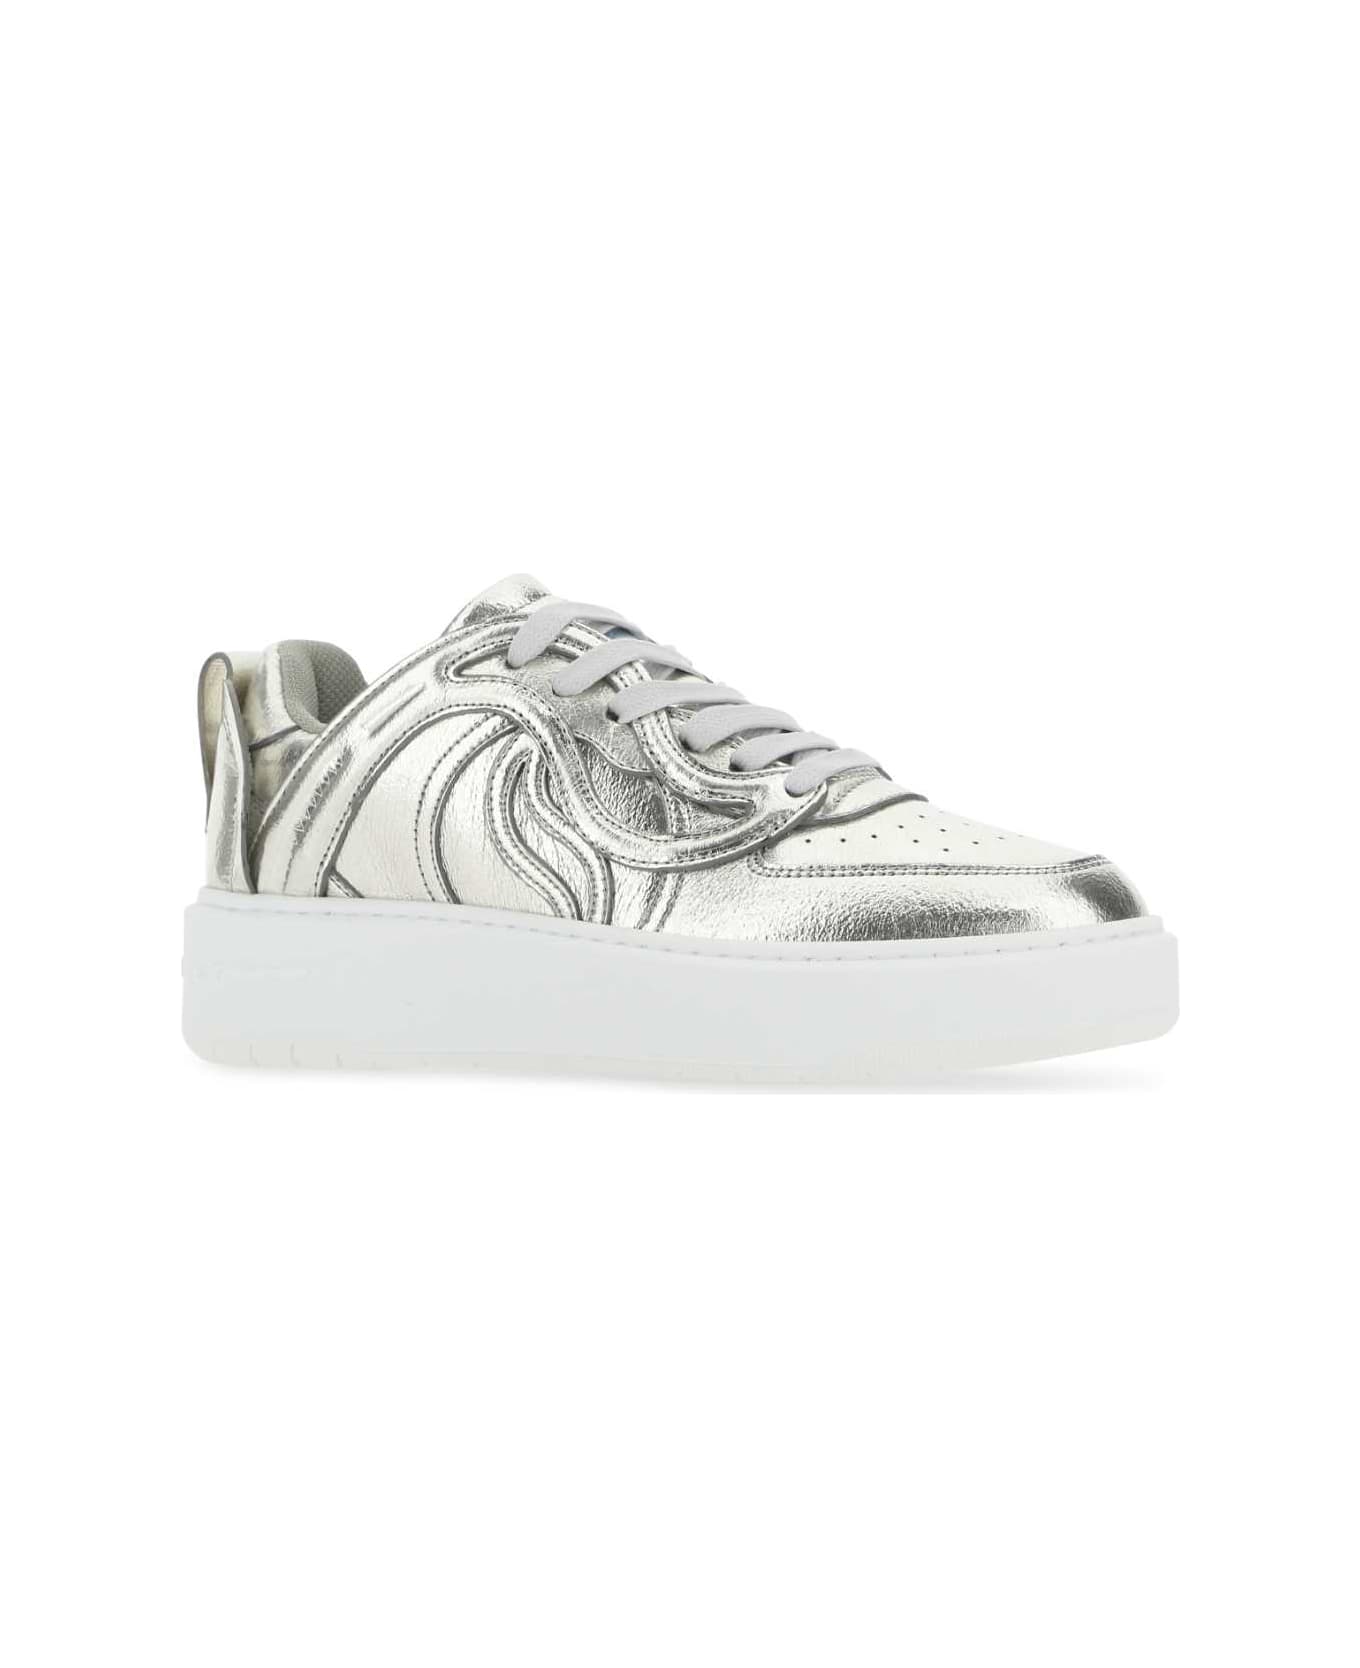 Stella McCartney Silver Synthetic Leather S-wave Sneakers - 8136 スニーカー